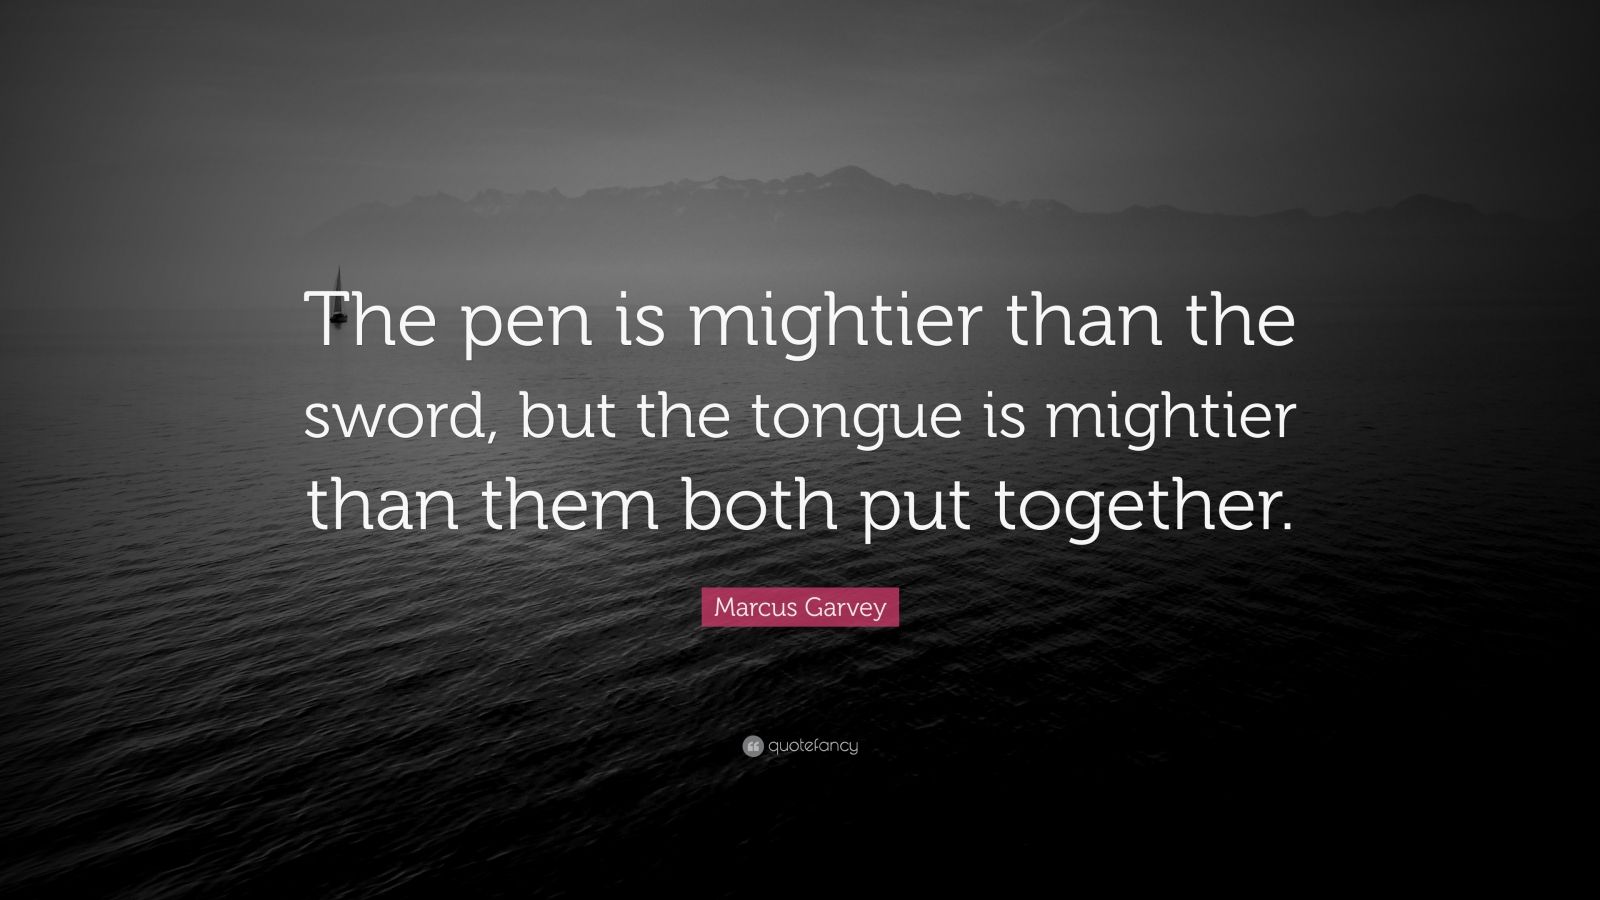 Marcus Garvey Quote: “The pen is mightier than the sword, but the